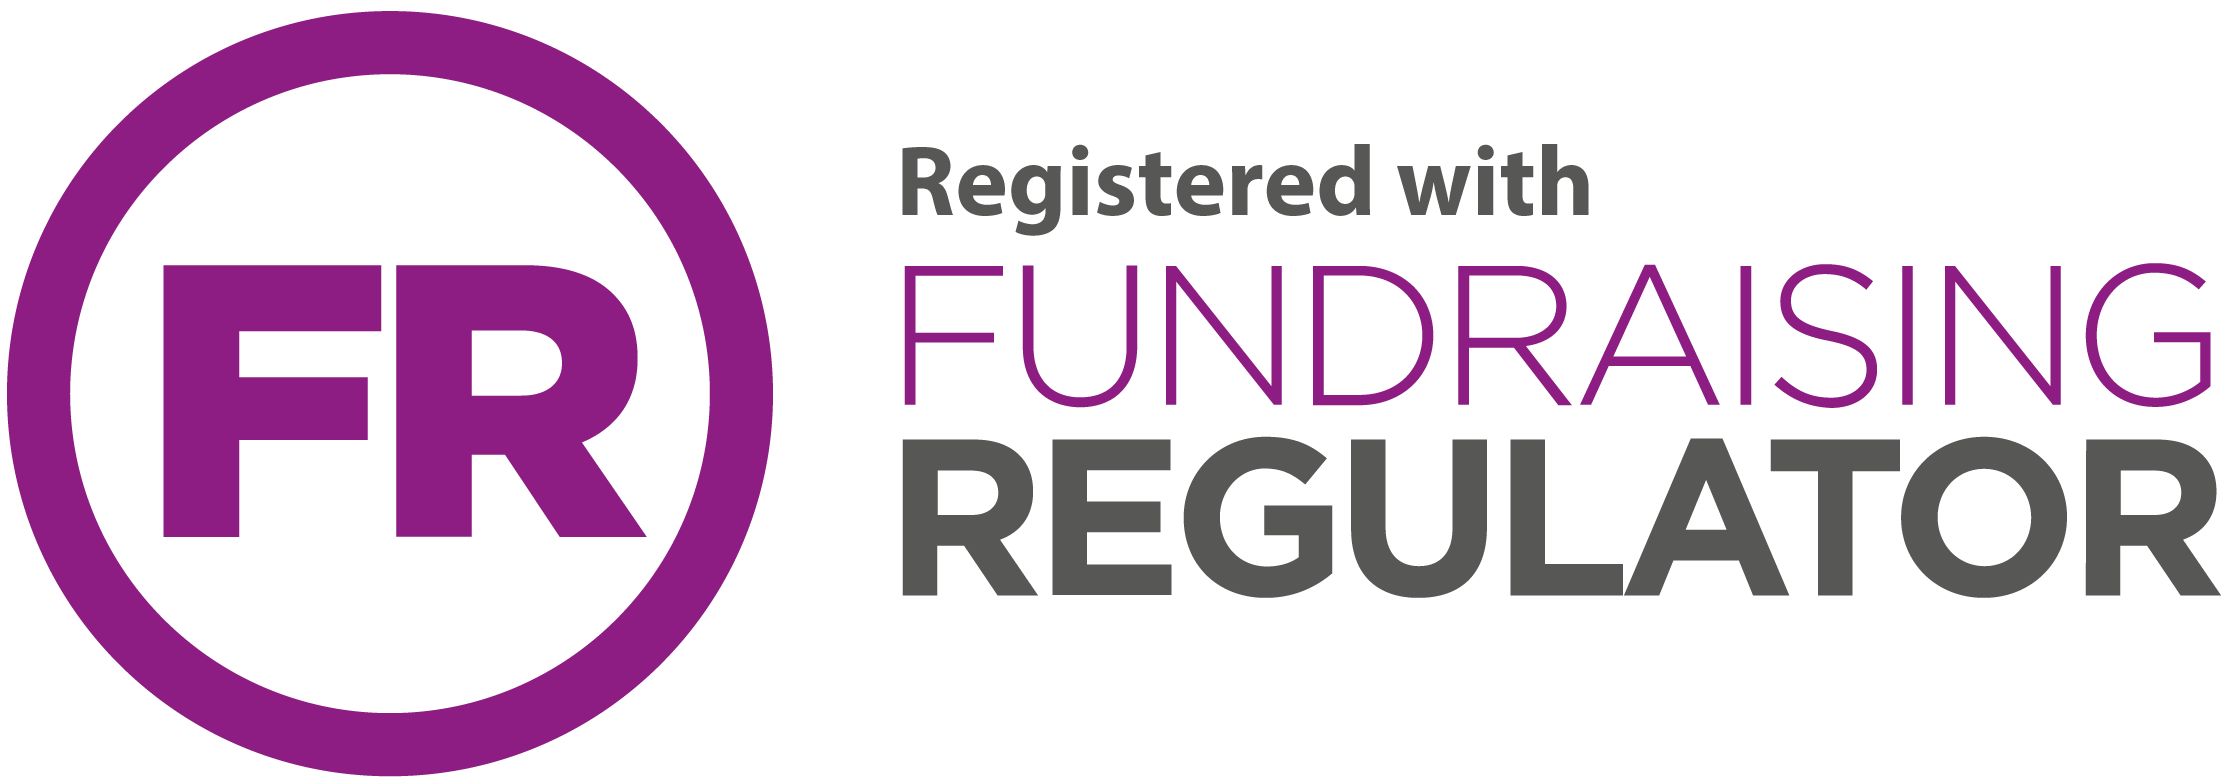 We are registered with the Fundraising Regulator